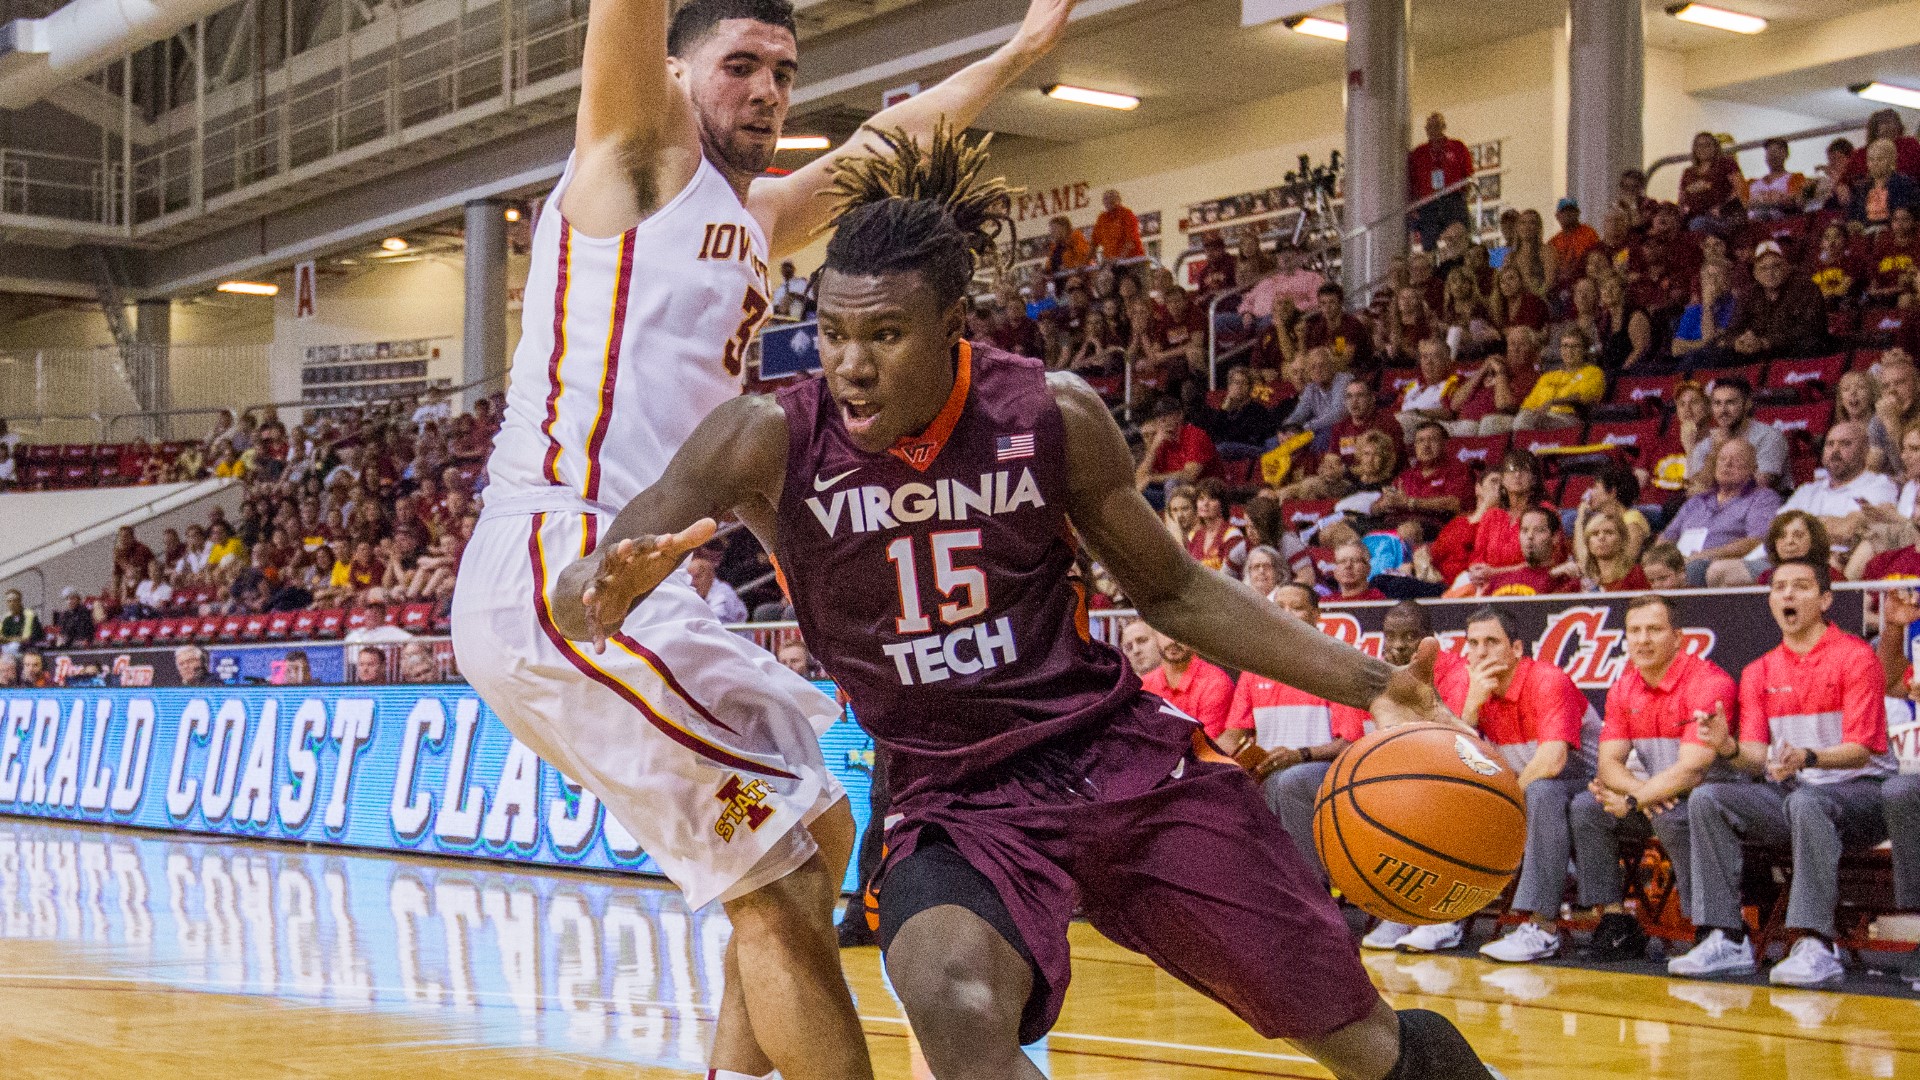 The Cape Henry Collegiate alum and Virginia Tech product goes to Red Raiders as graduate transfer.